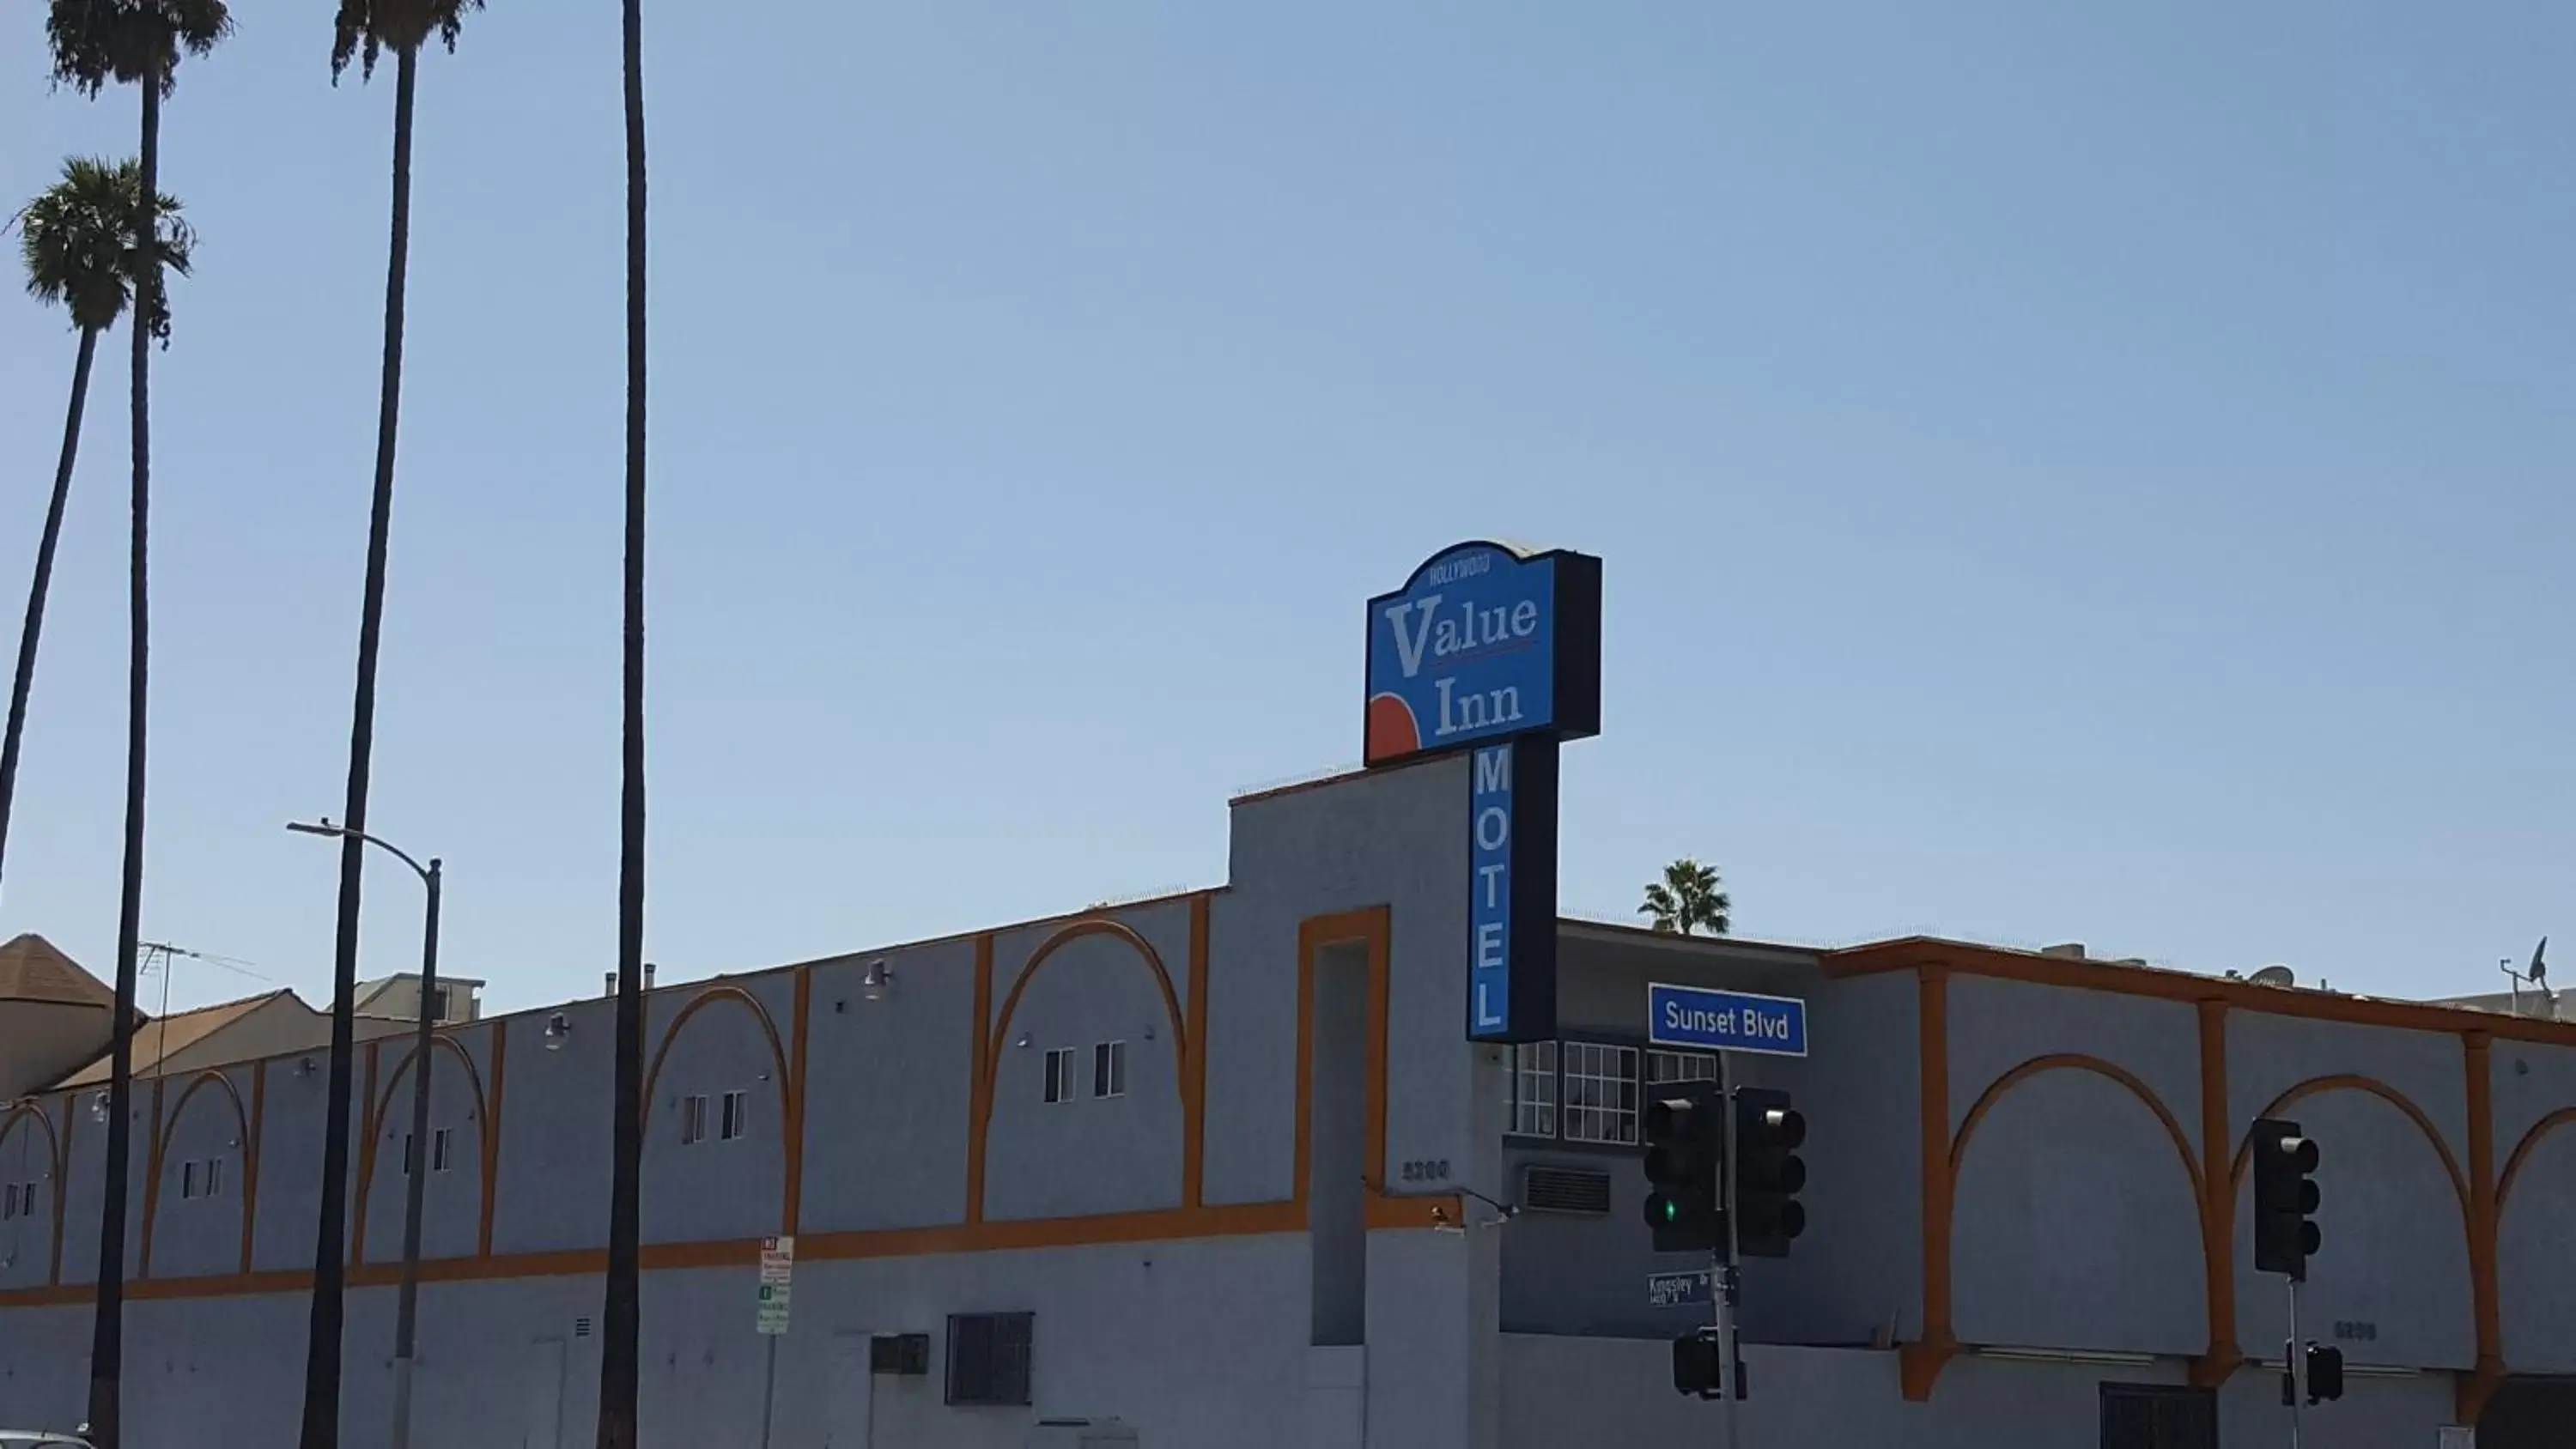 Property Building in Value Inn Hollywood